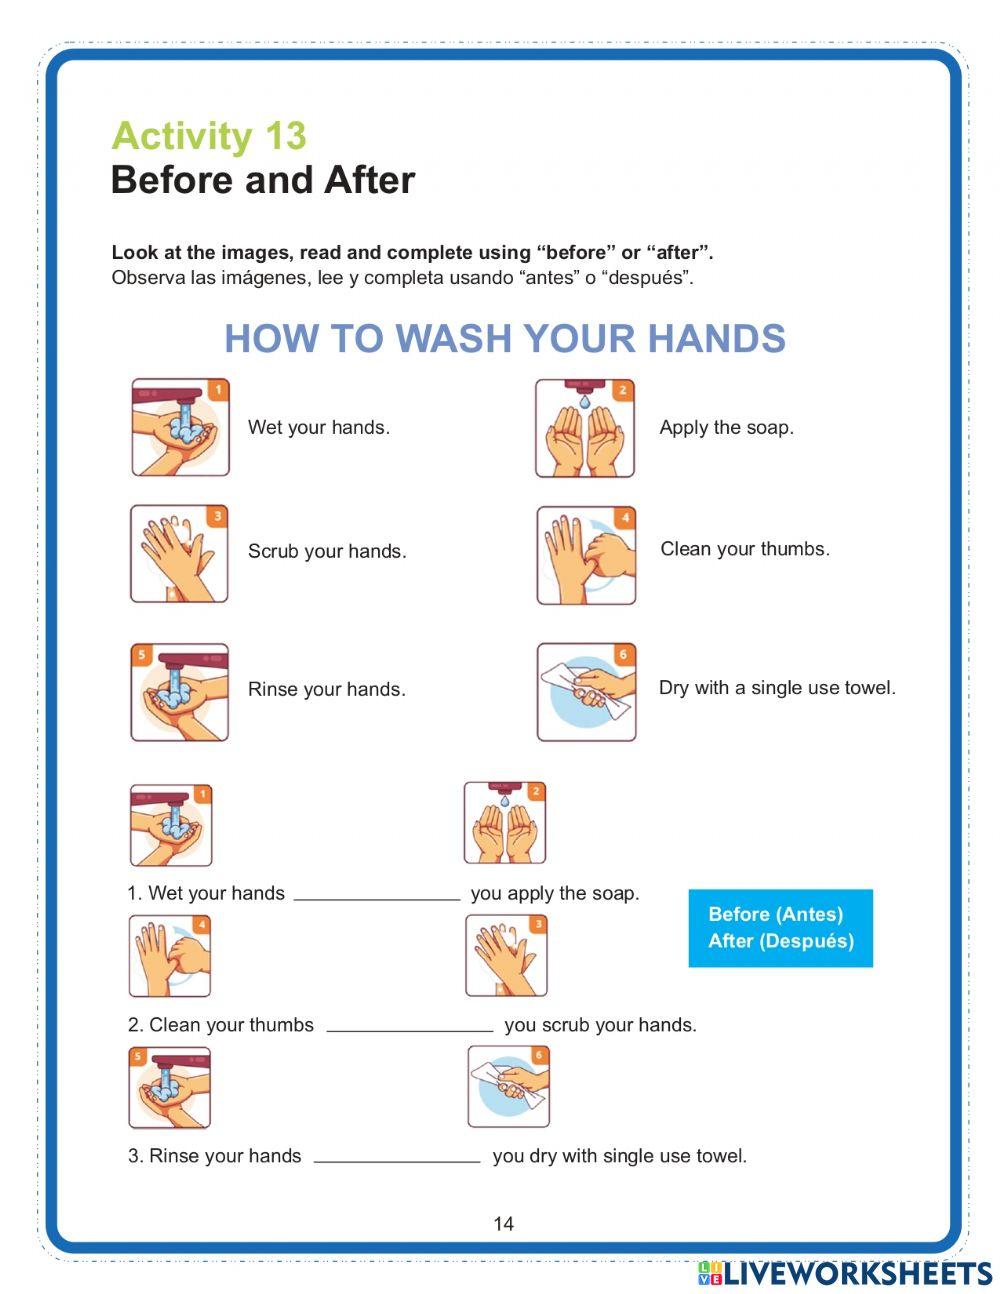 How to wash your hands 2